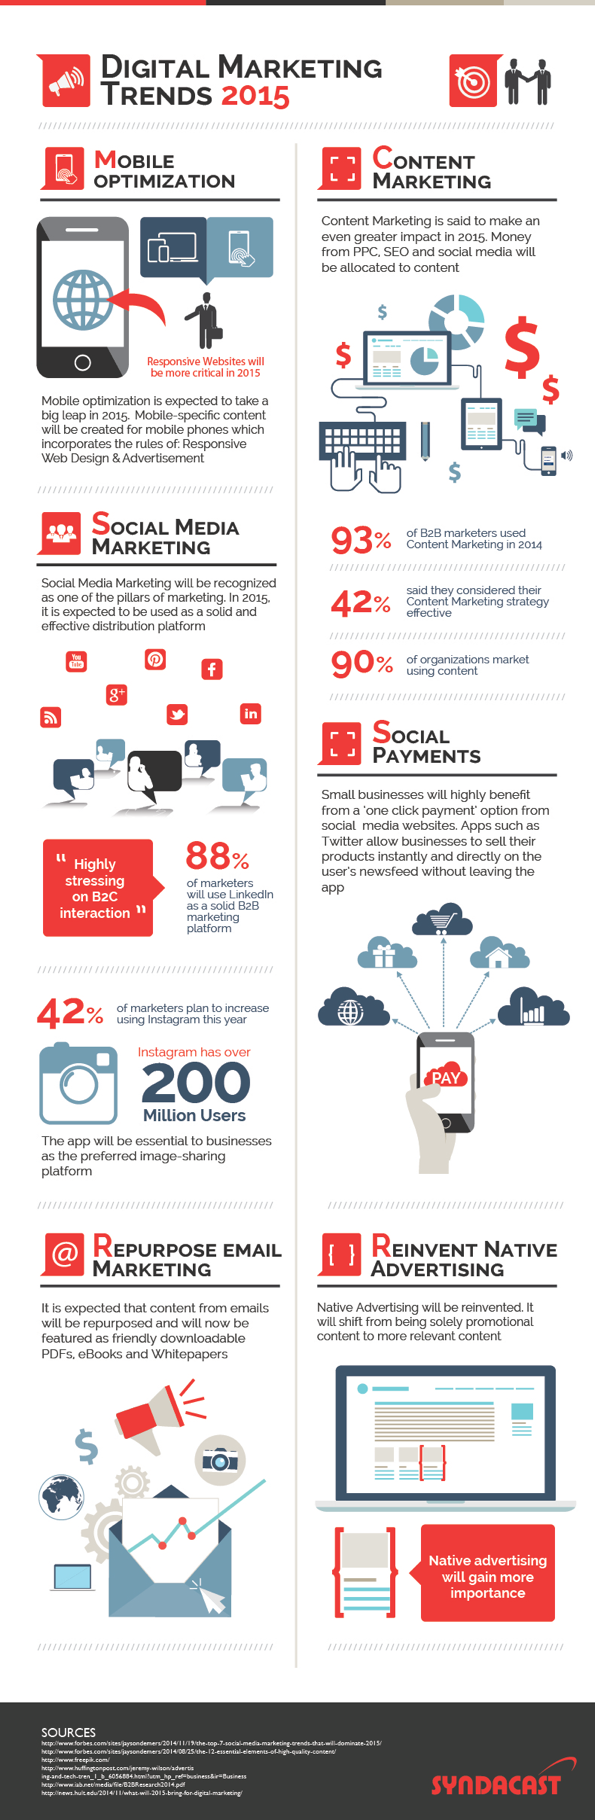 6 Digital Marketing Trends for 2015 Infographic image